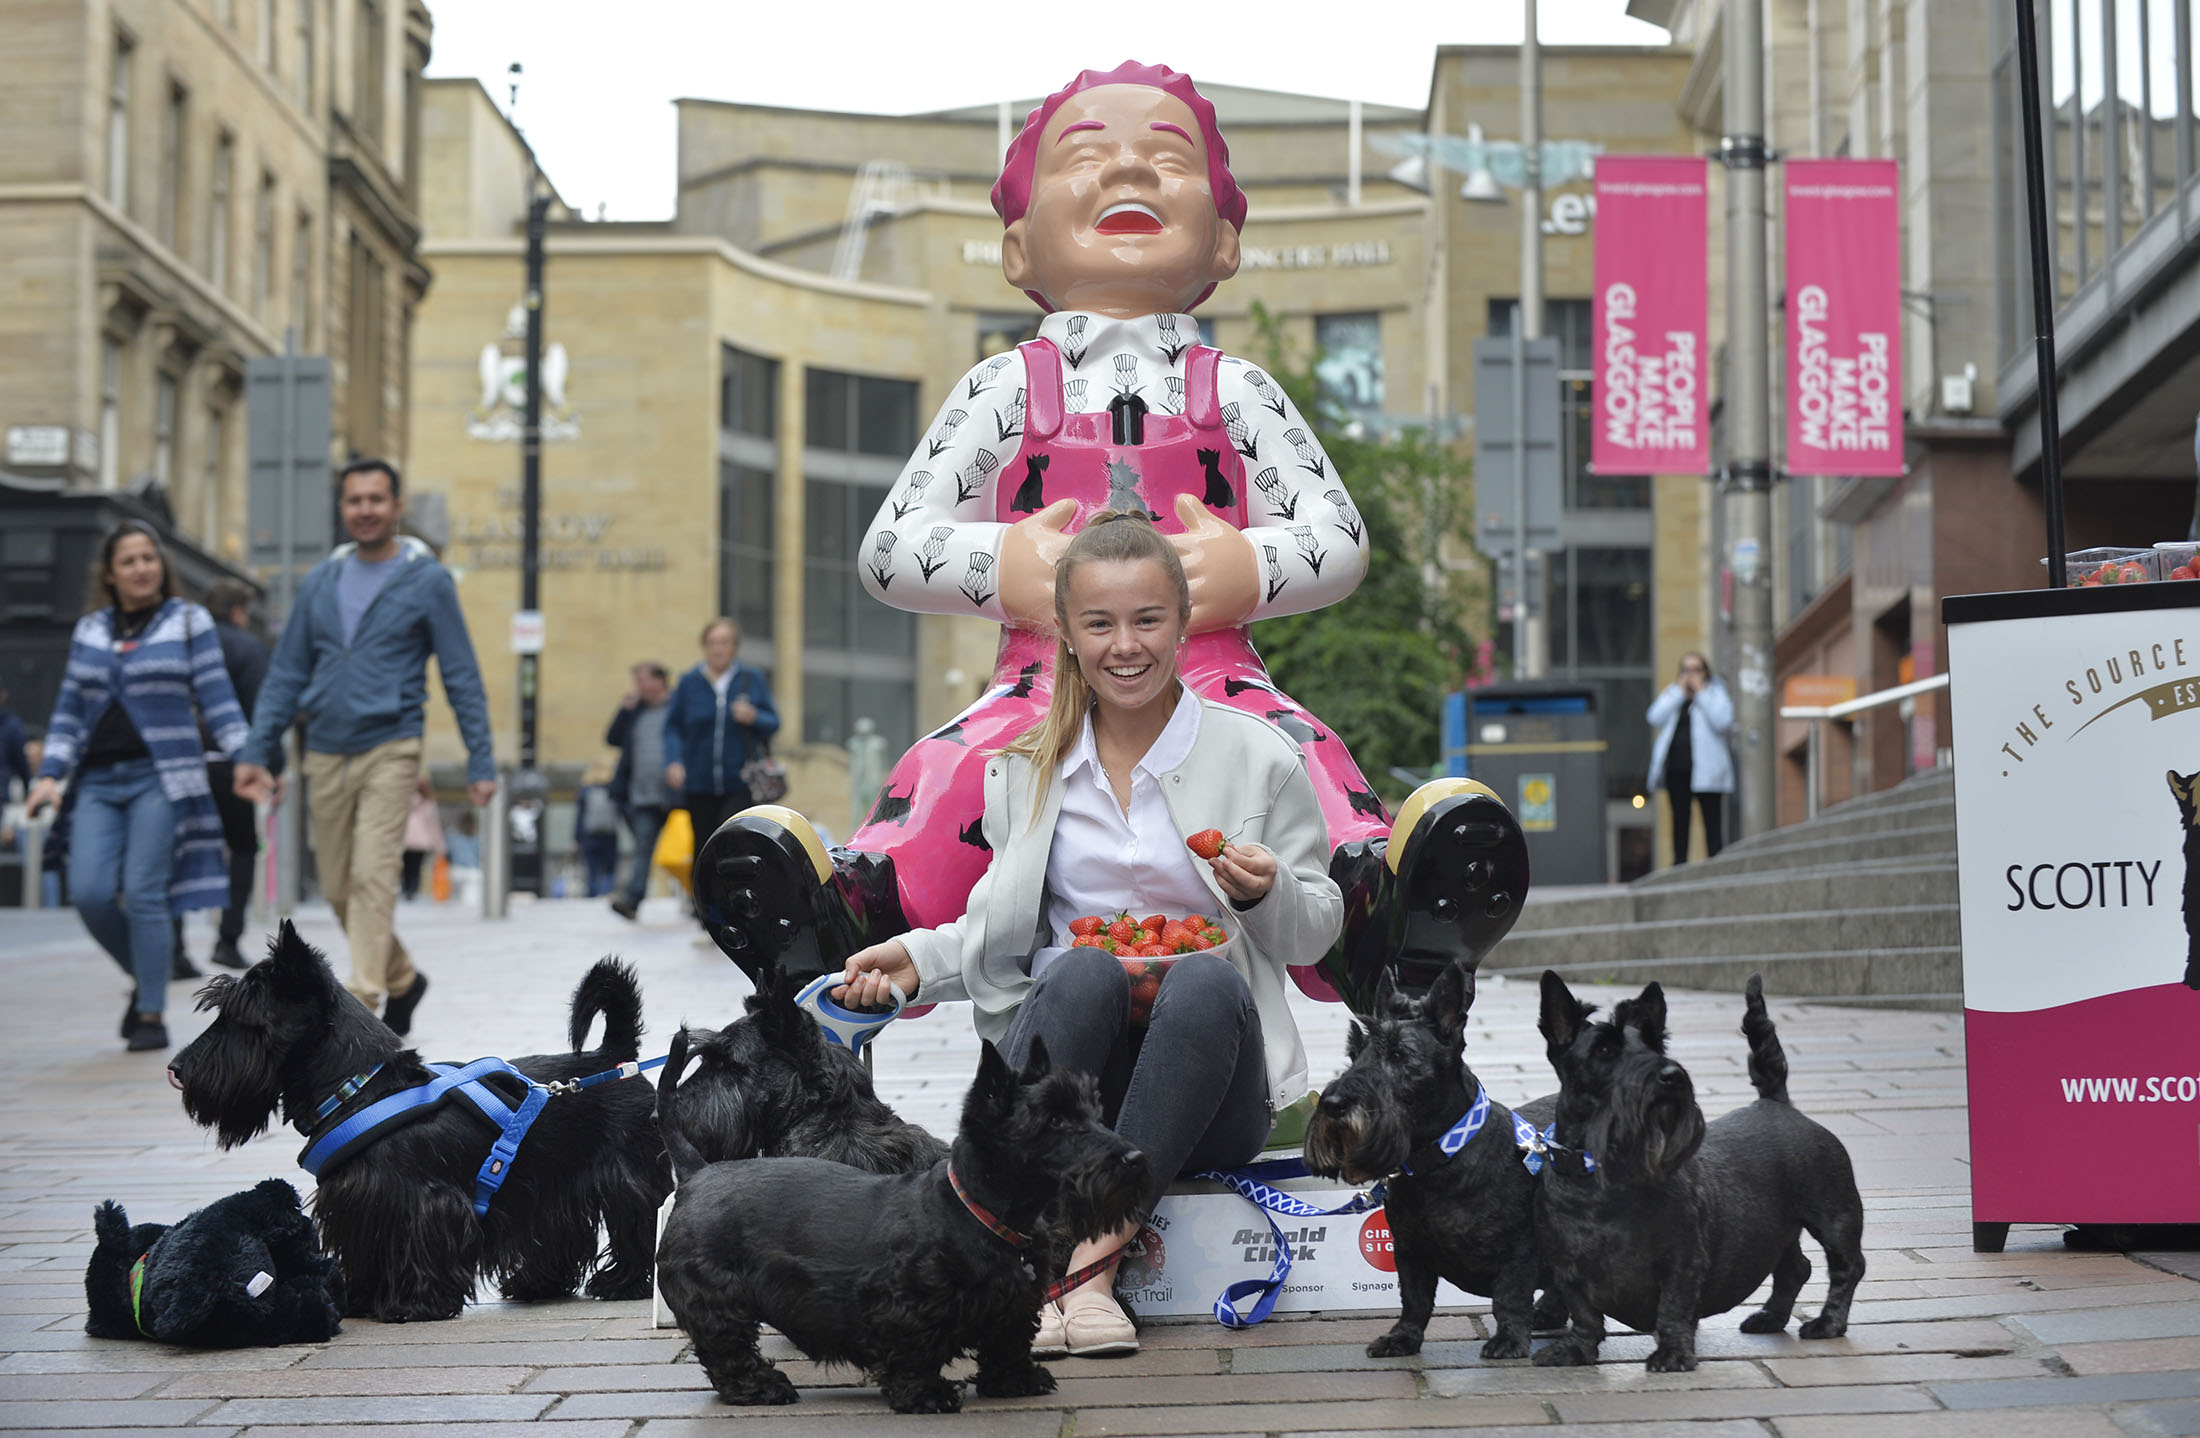 16-year-old Jessica Thain poses with the Scottie dogs and Oor Wullie